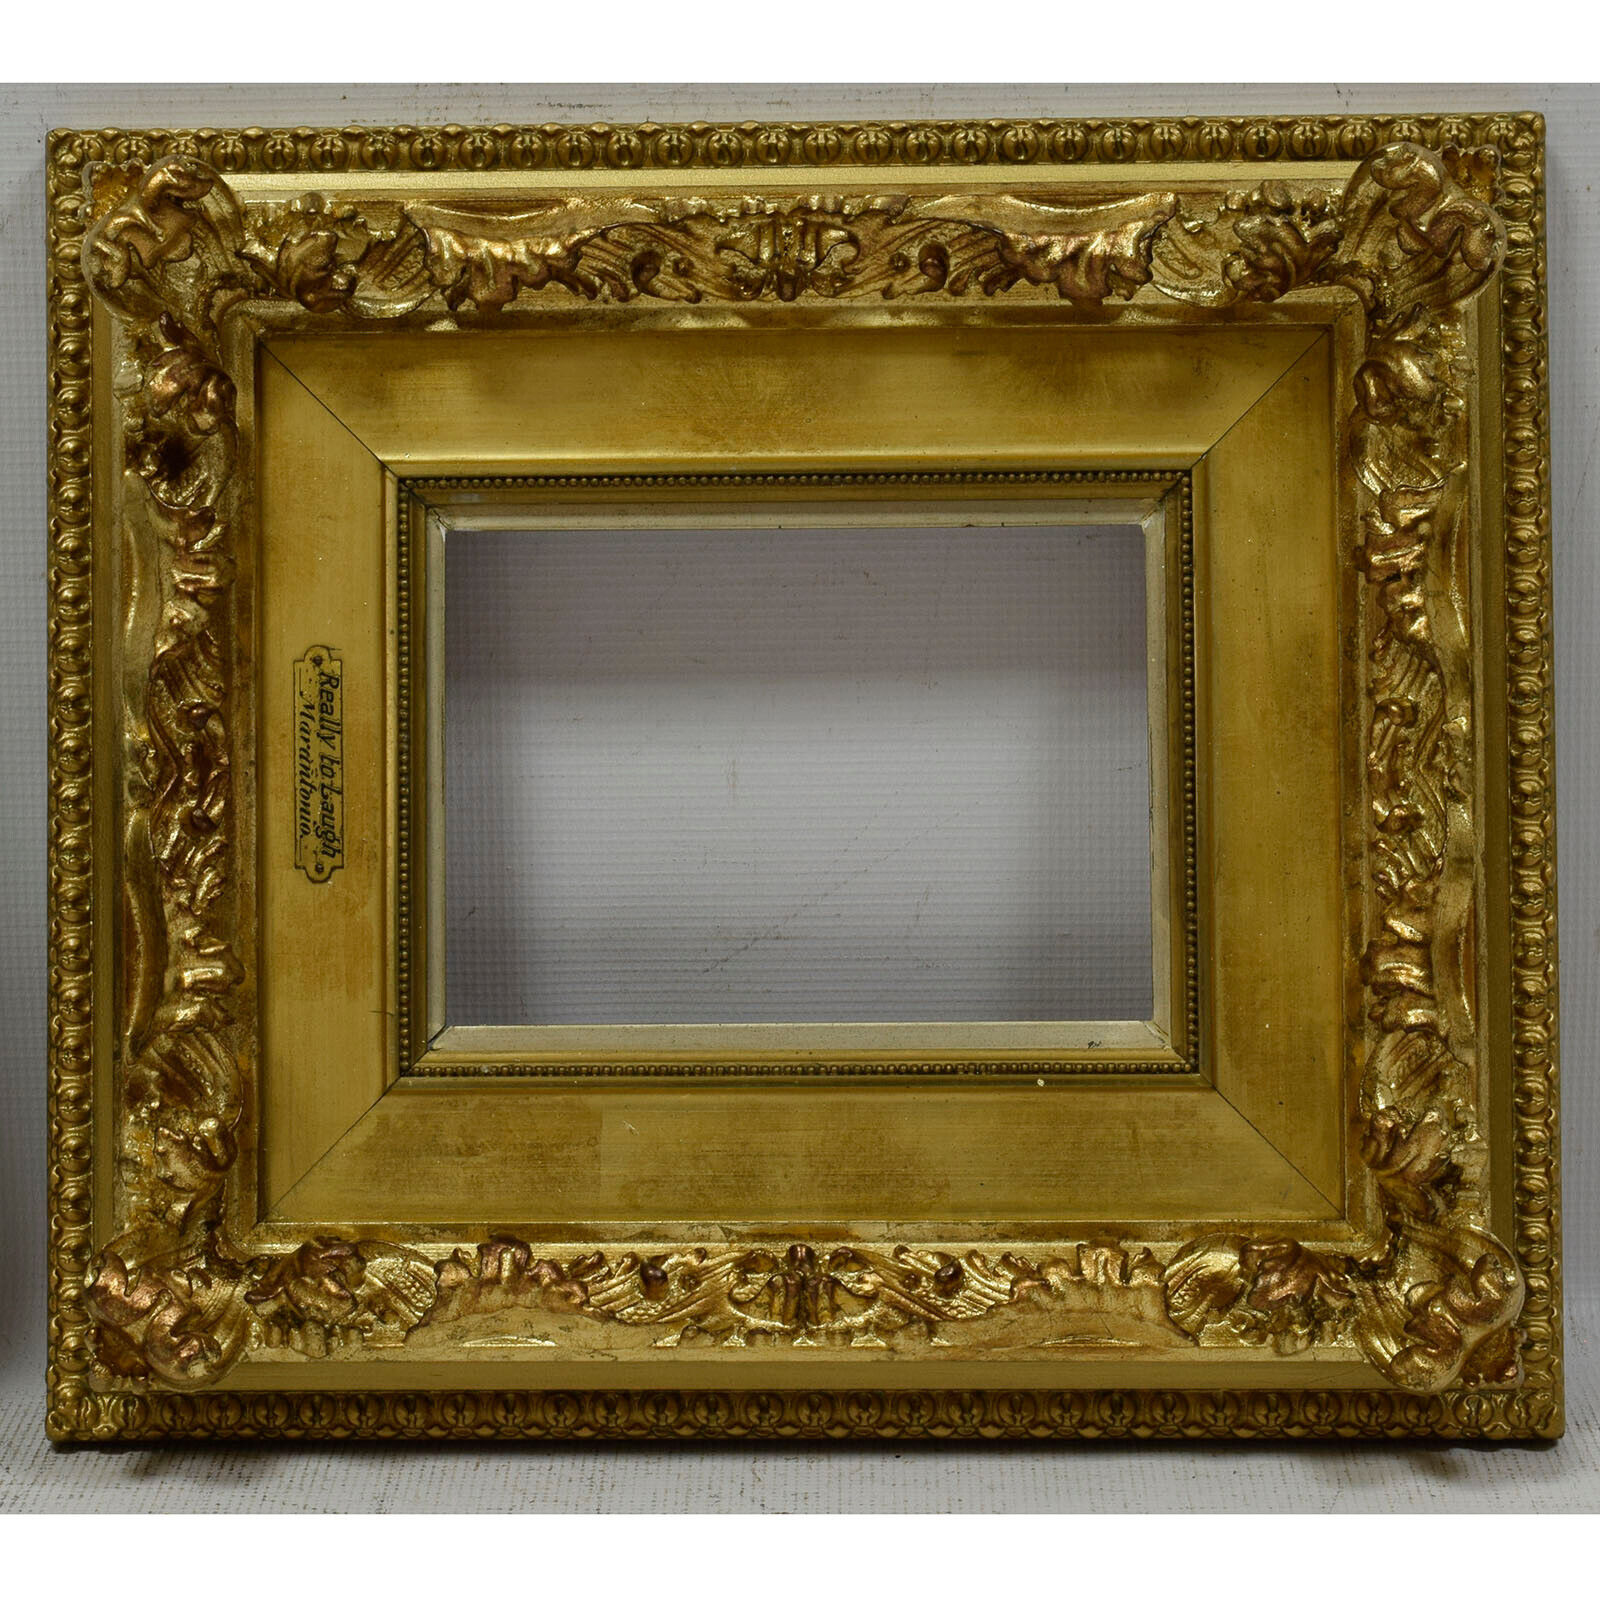 Ca. 1880-1900 Old wooden frame with metal leaf Internal: 8.2x5.5 in